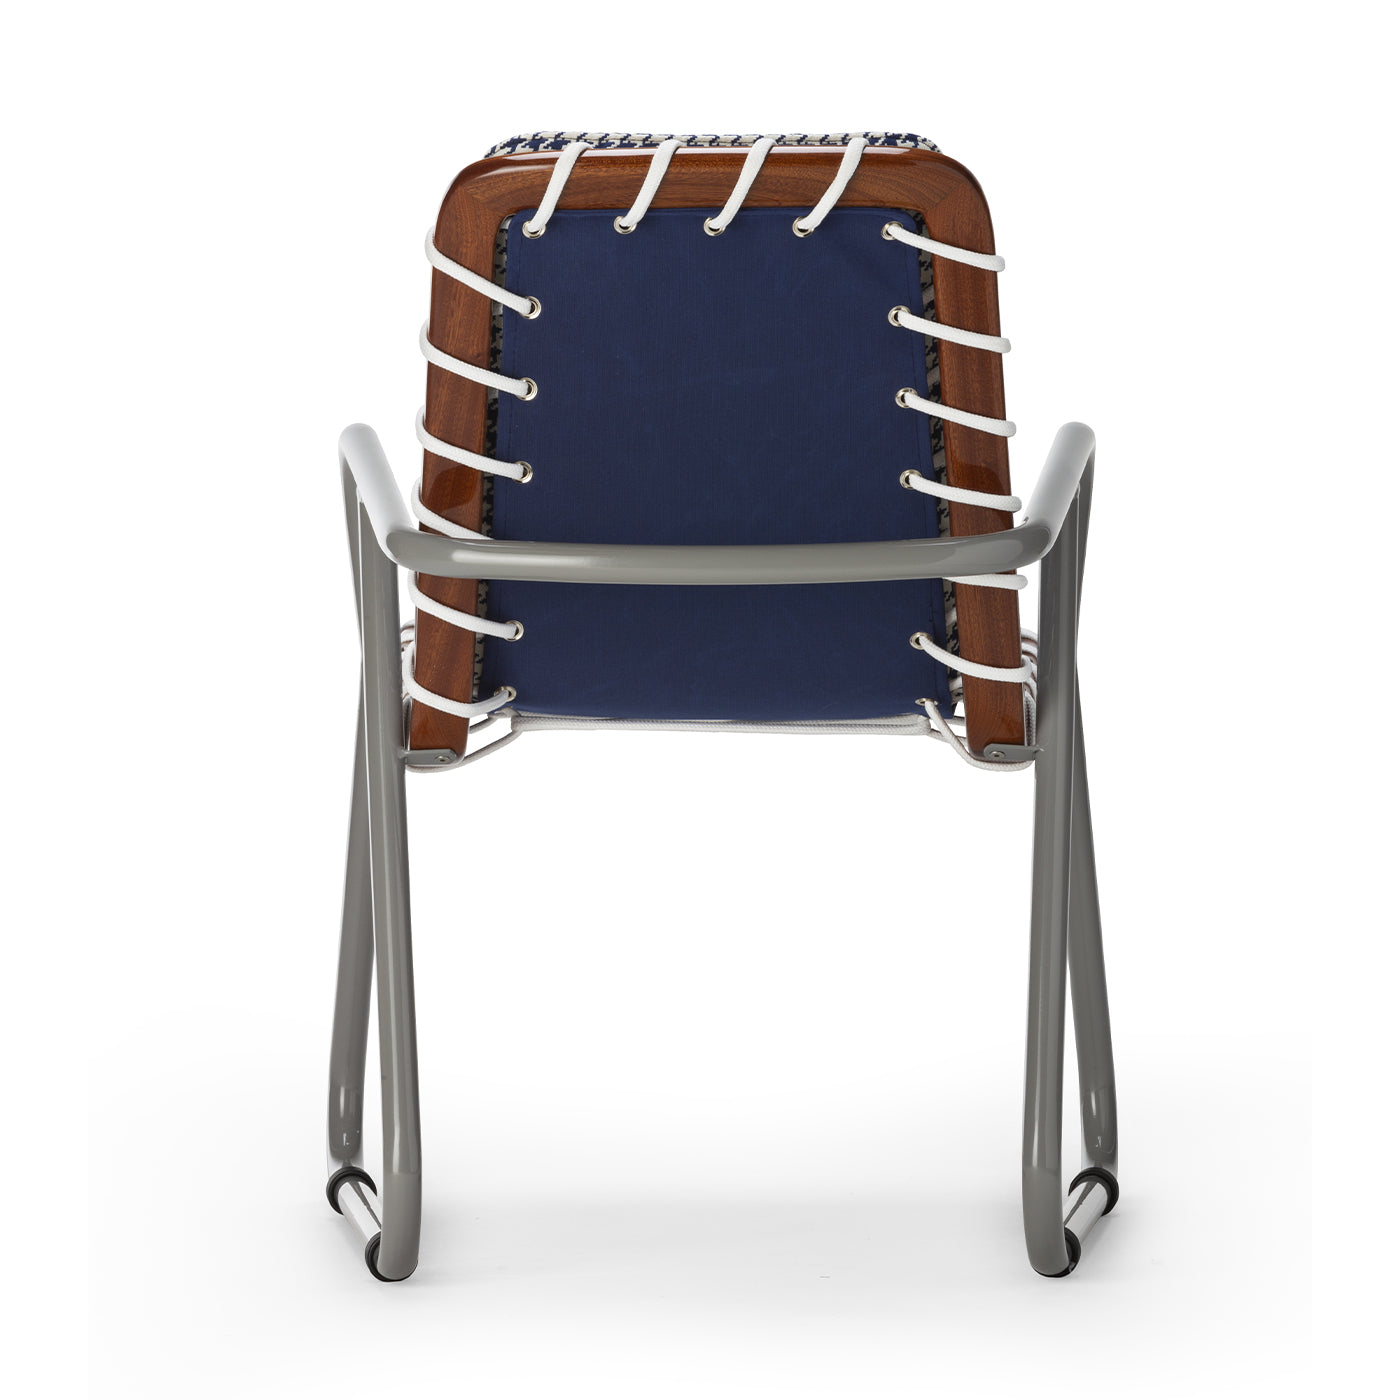 Sunset Dining Chair by Paola Navone - Alternative view 3